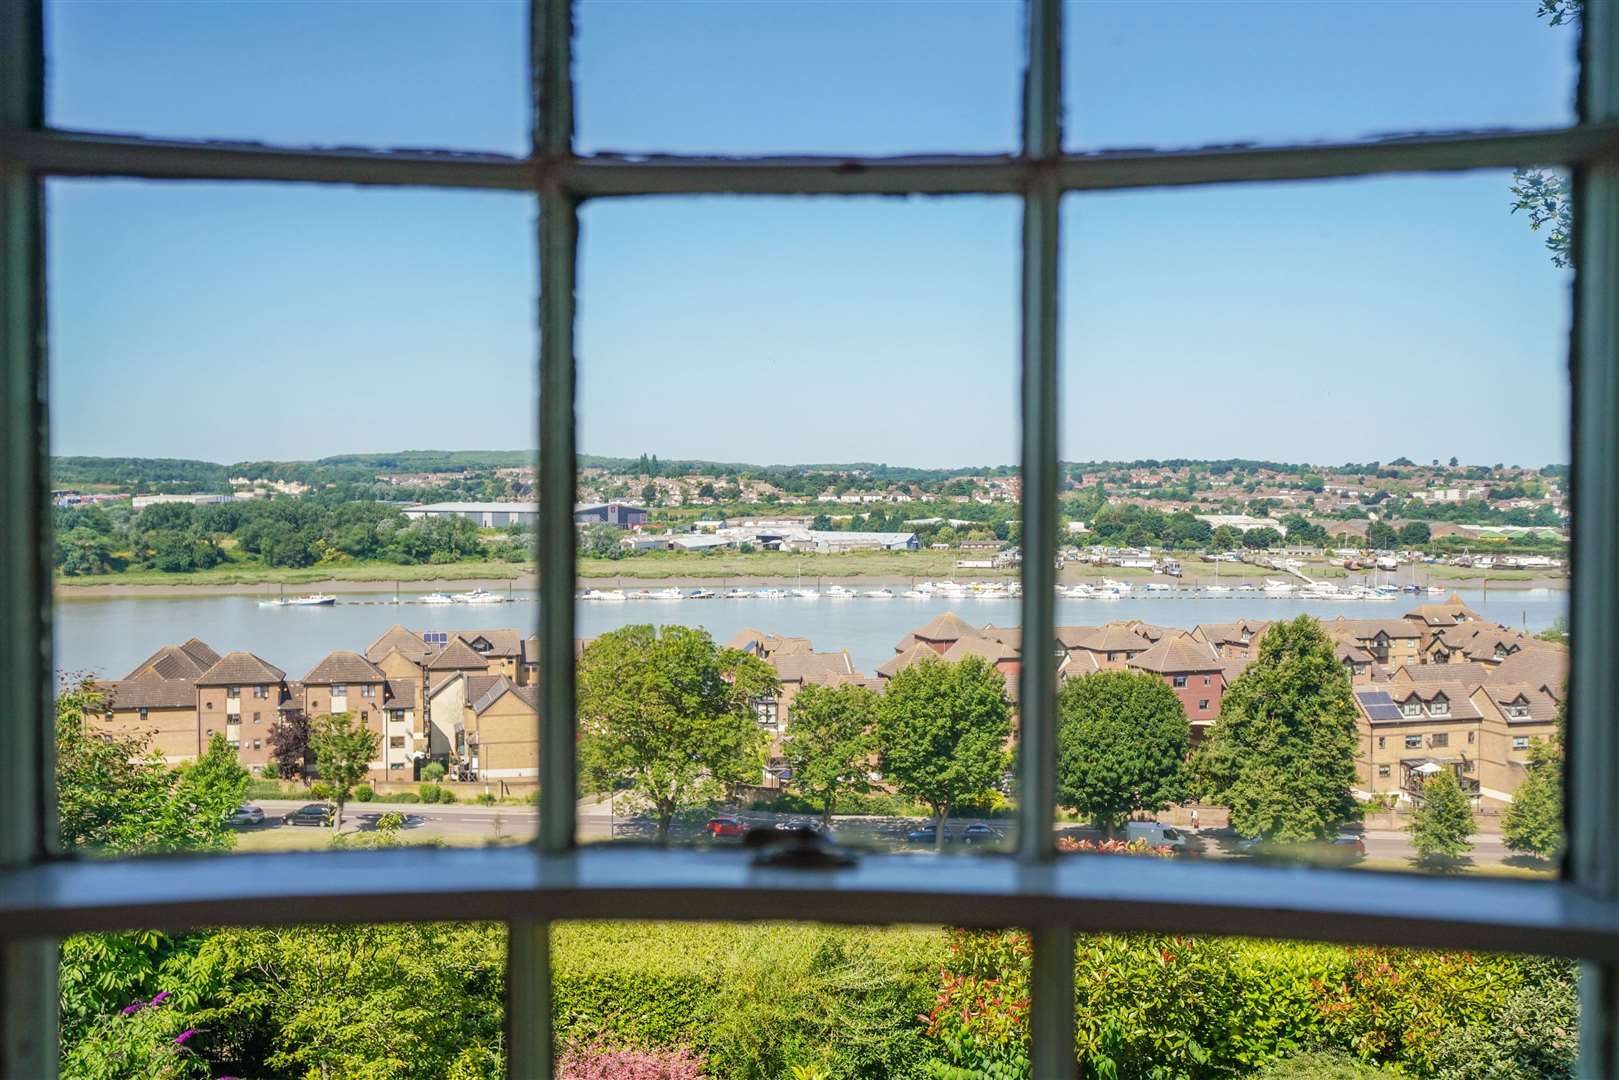 Room with a river view from the Gleanings in Rochester. John D Wood